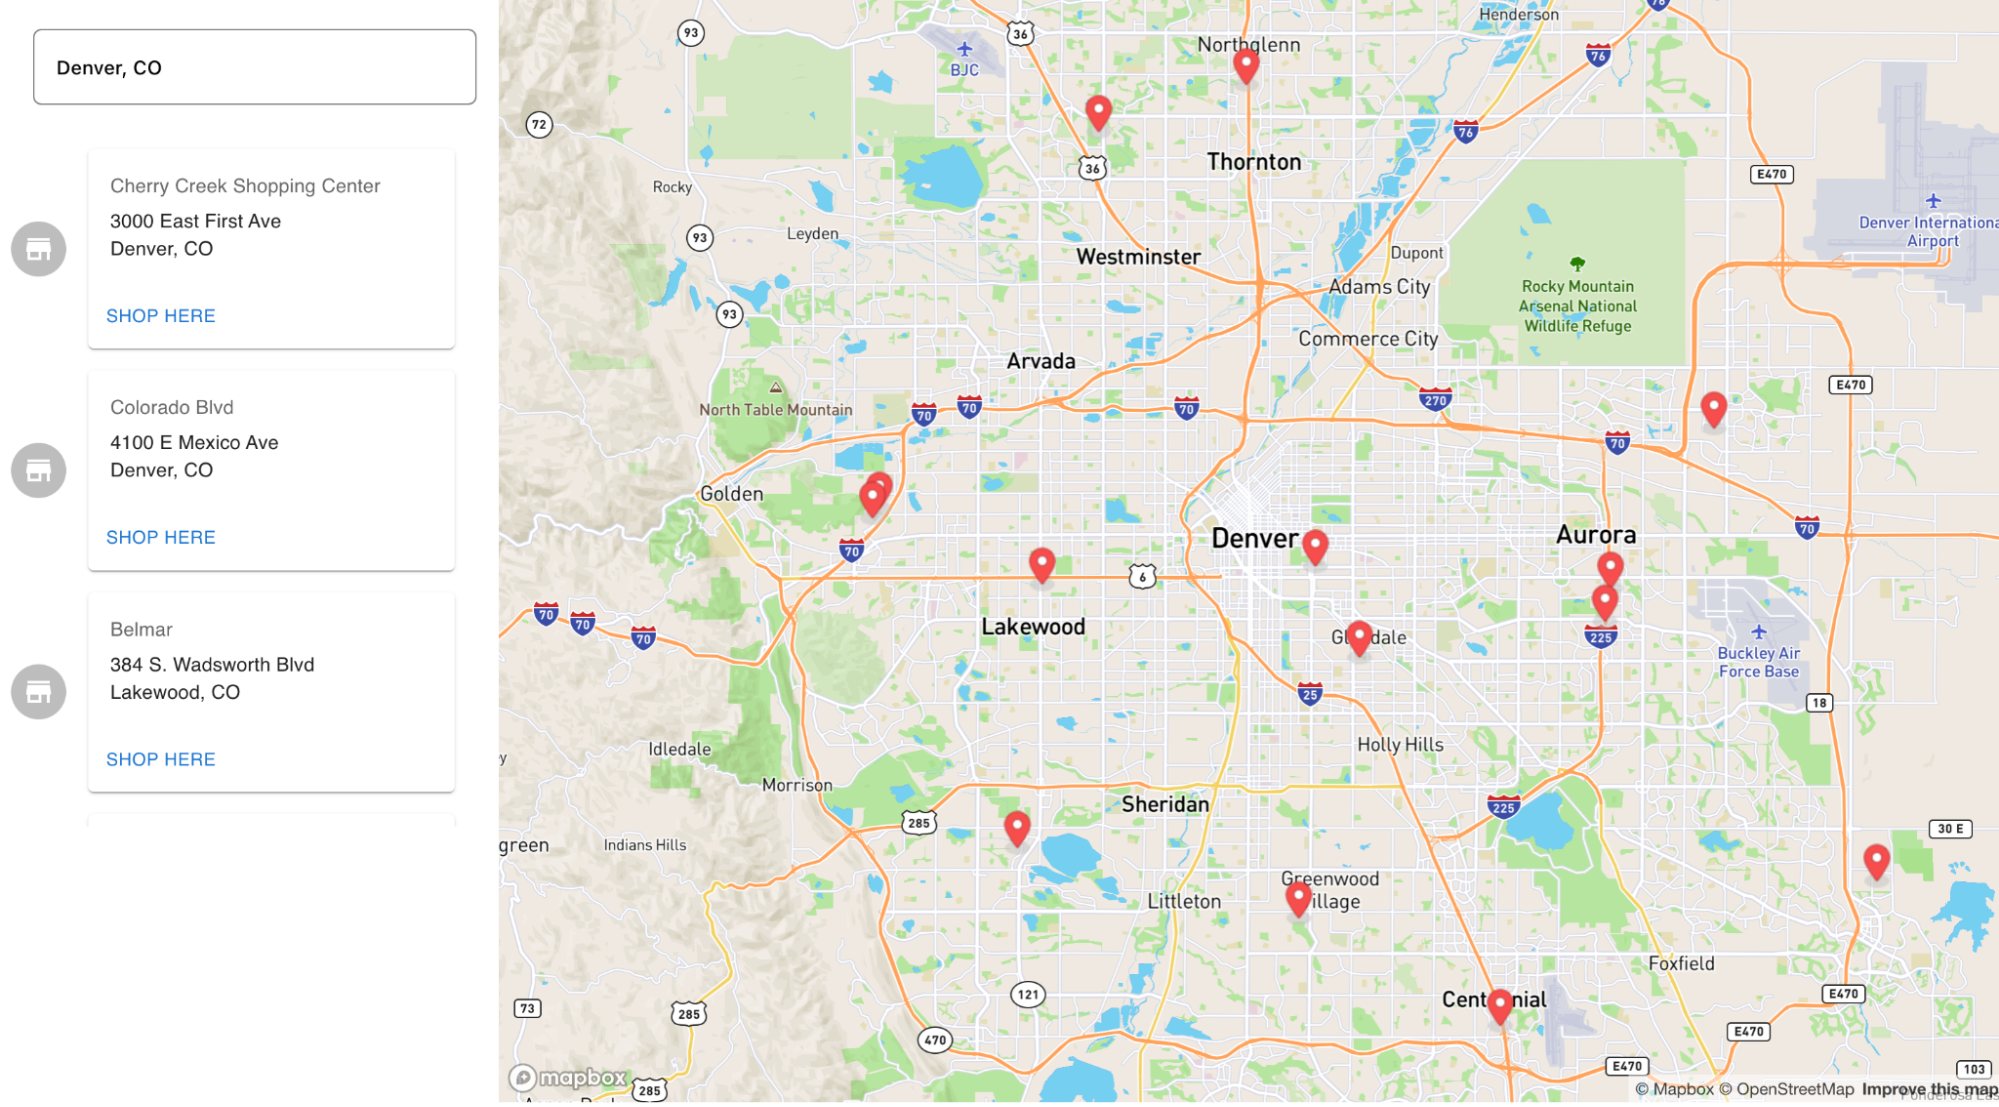 The finished store locator functionality